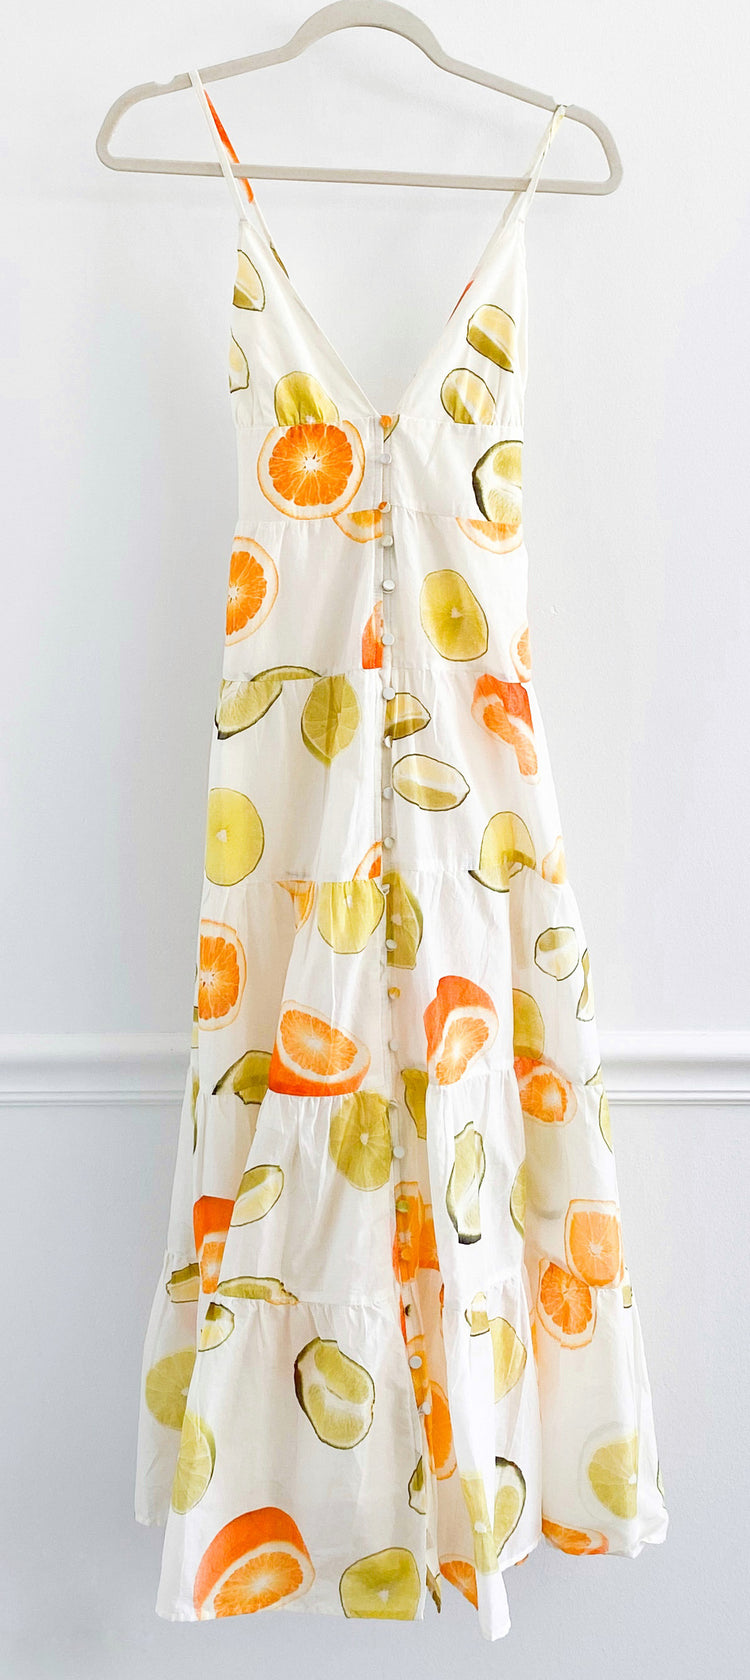 J.Crew x Eddie Parker $168 Parker Tiered Maxi Dress in Oranges and Limes Size XS